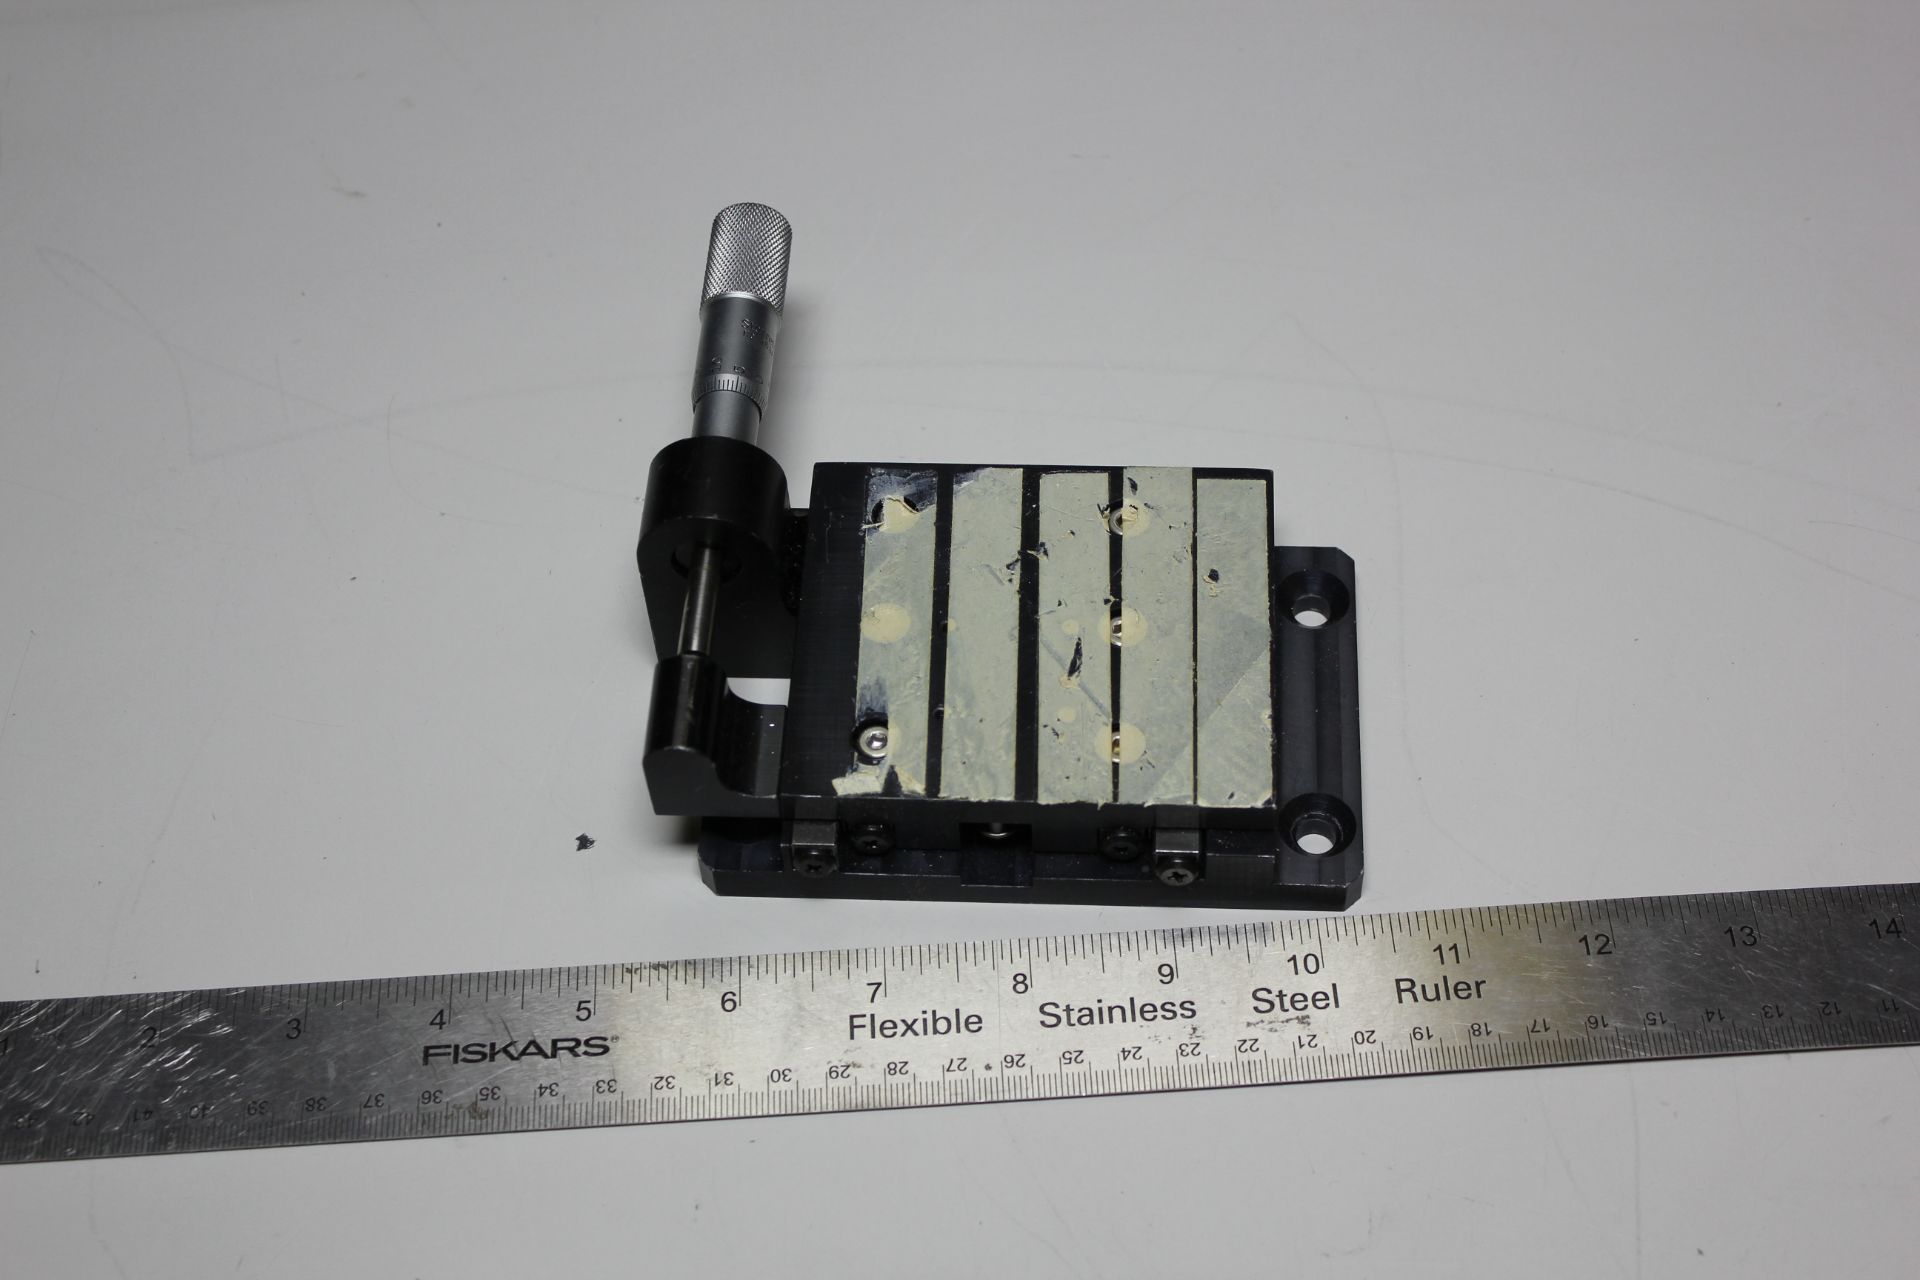 PRECISION LINEAR STAGE WITH STARRETT MICROMETER